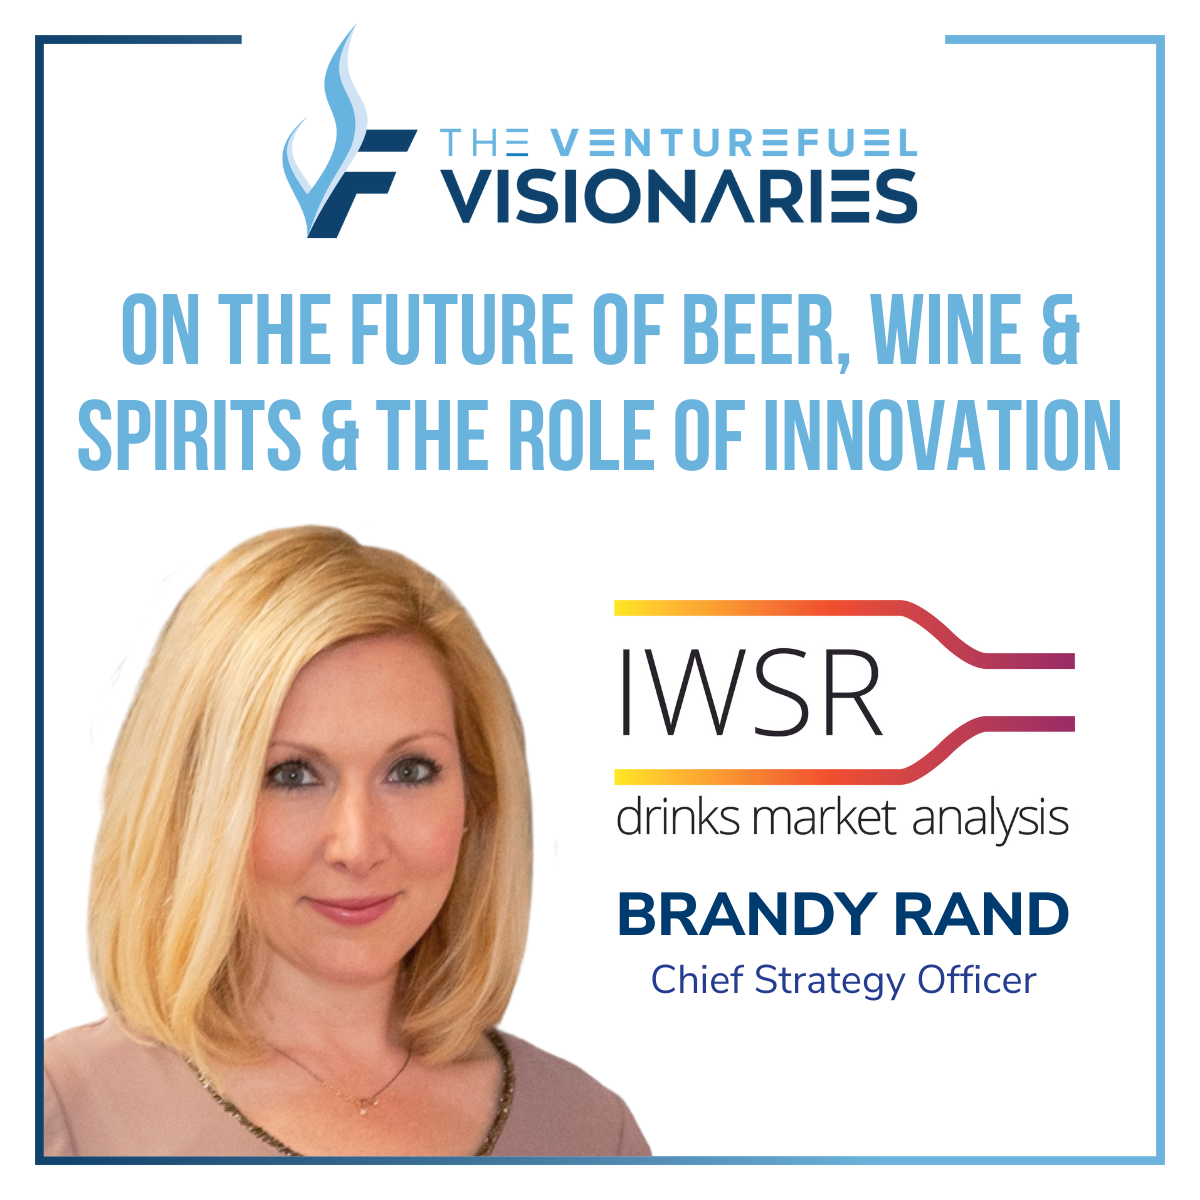 Your Next Drink-IWSR Chief Strategy Officer Brandy Rand